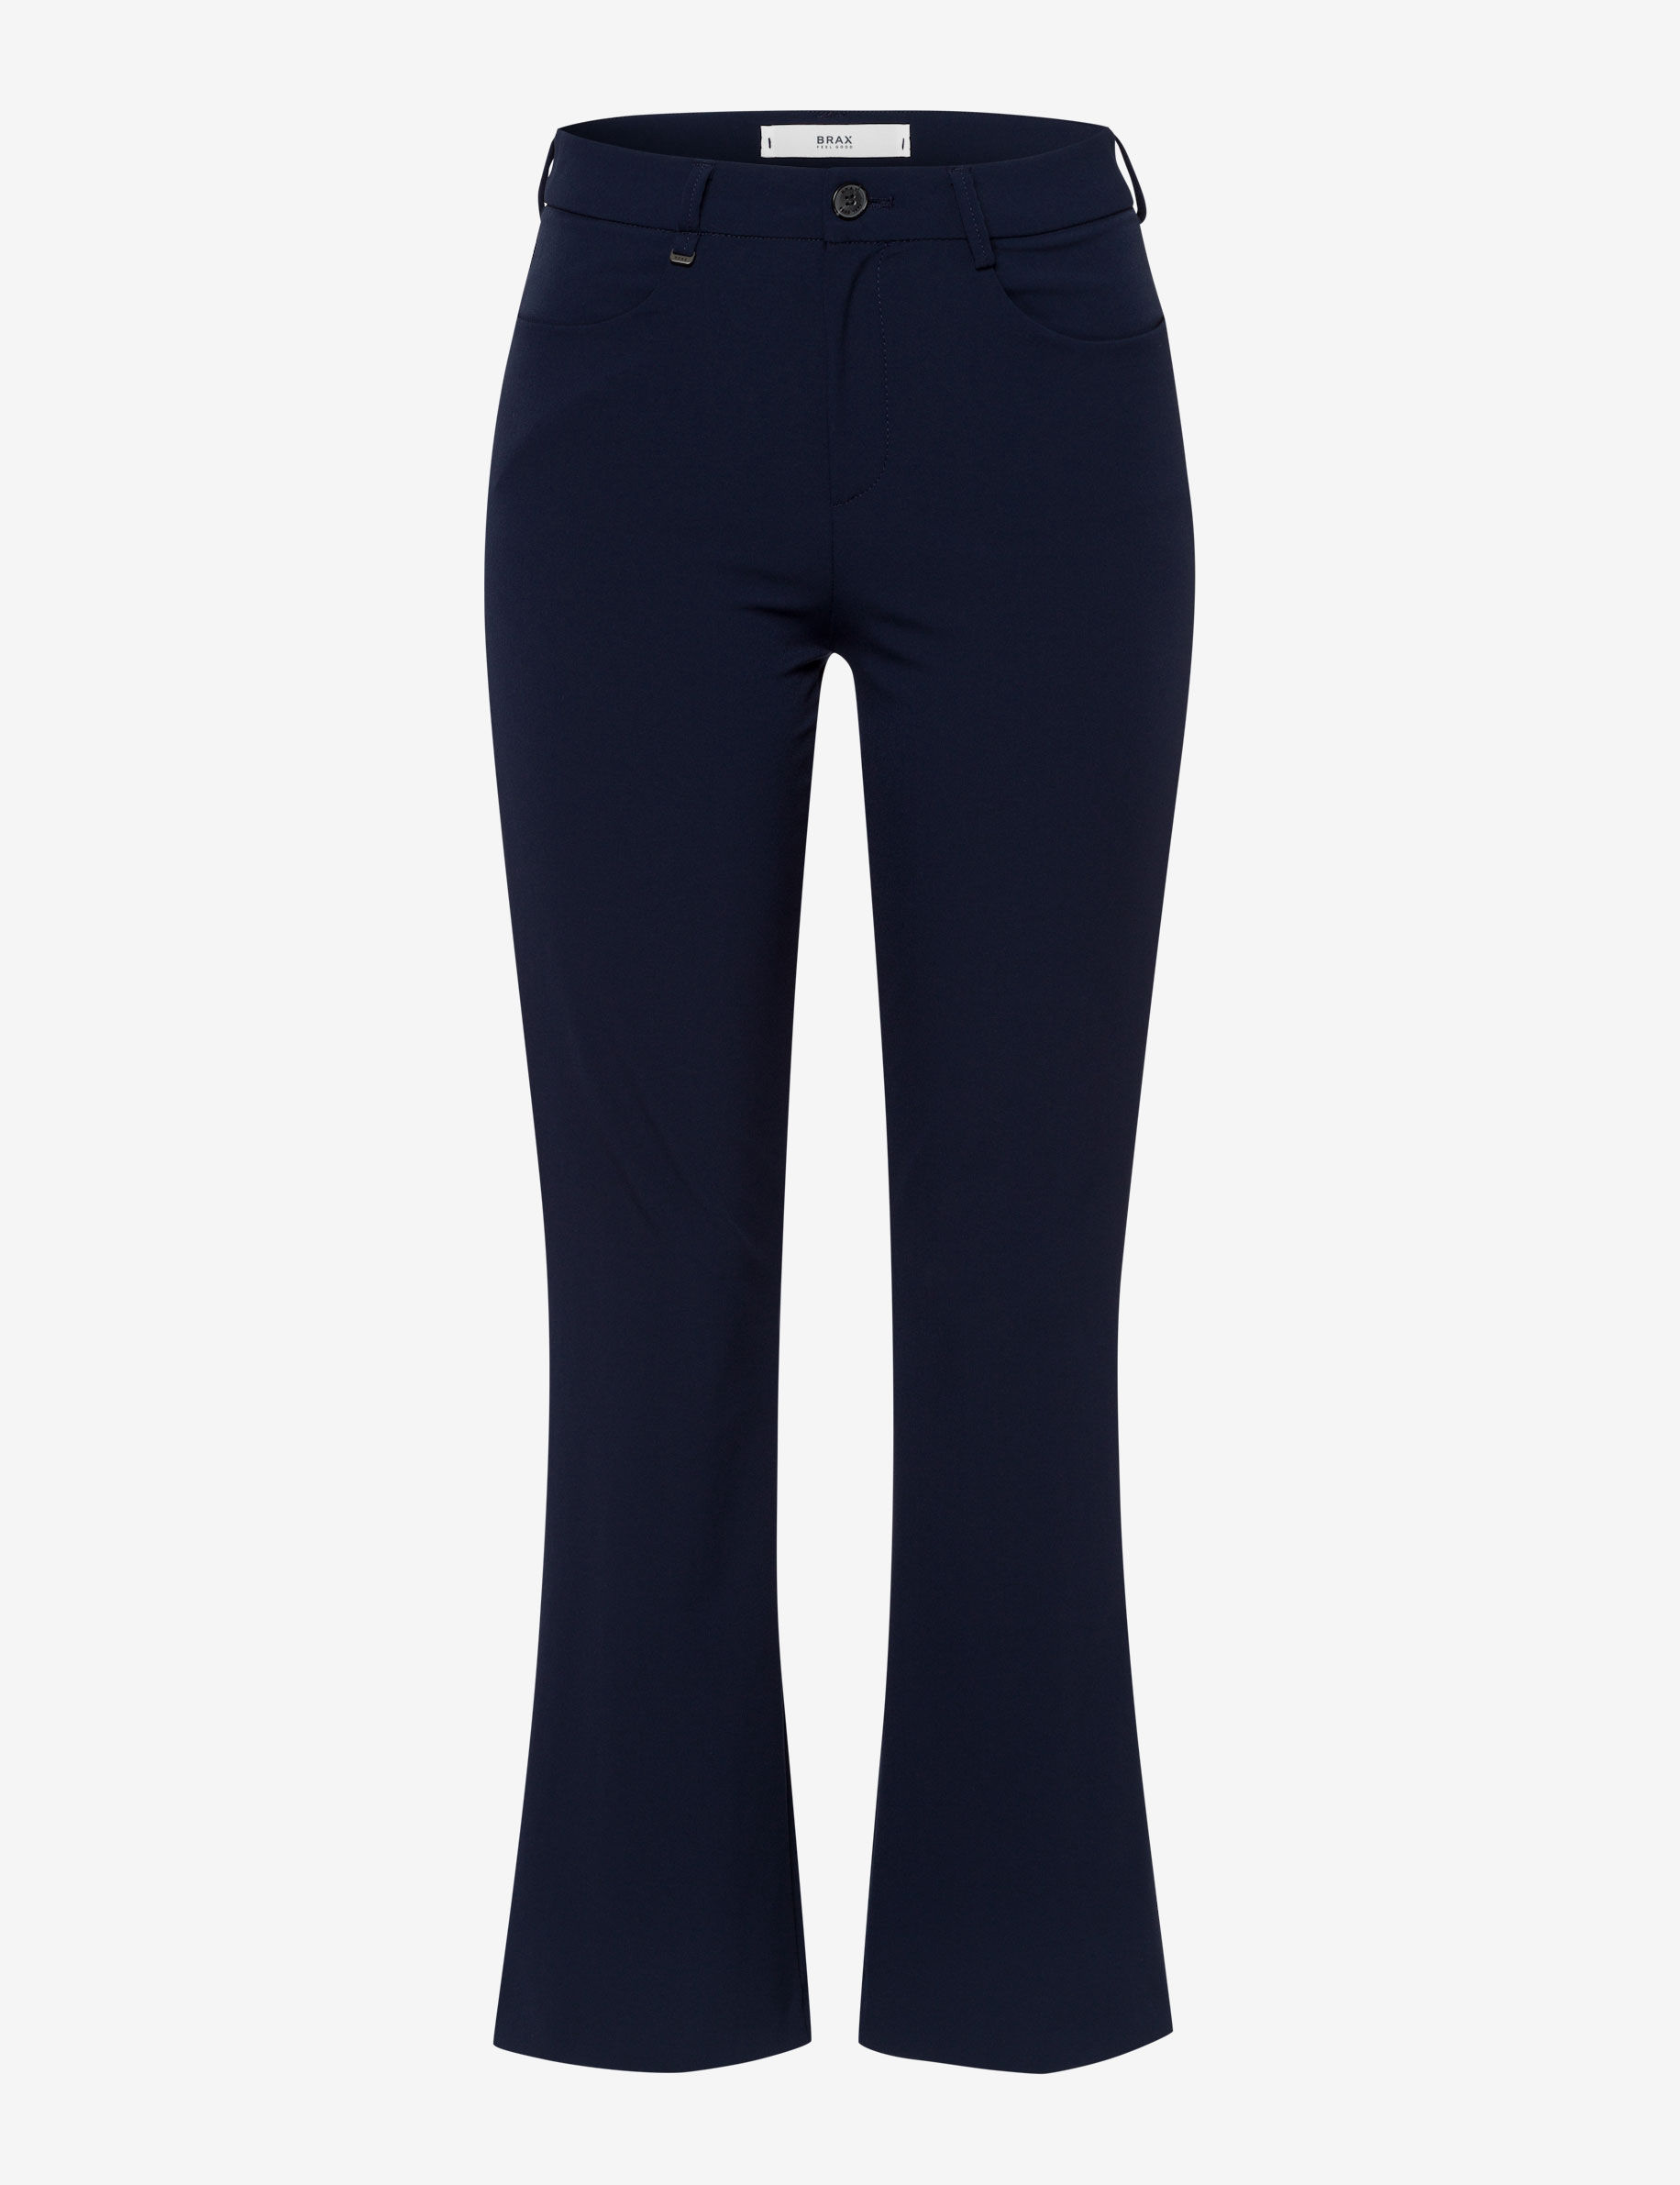 Women Style SHAKIRA S NAVY Slim Fit Stand-alone front view